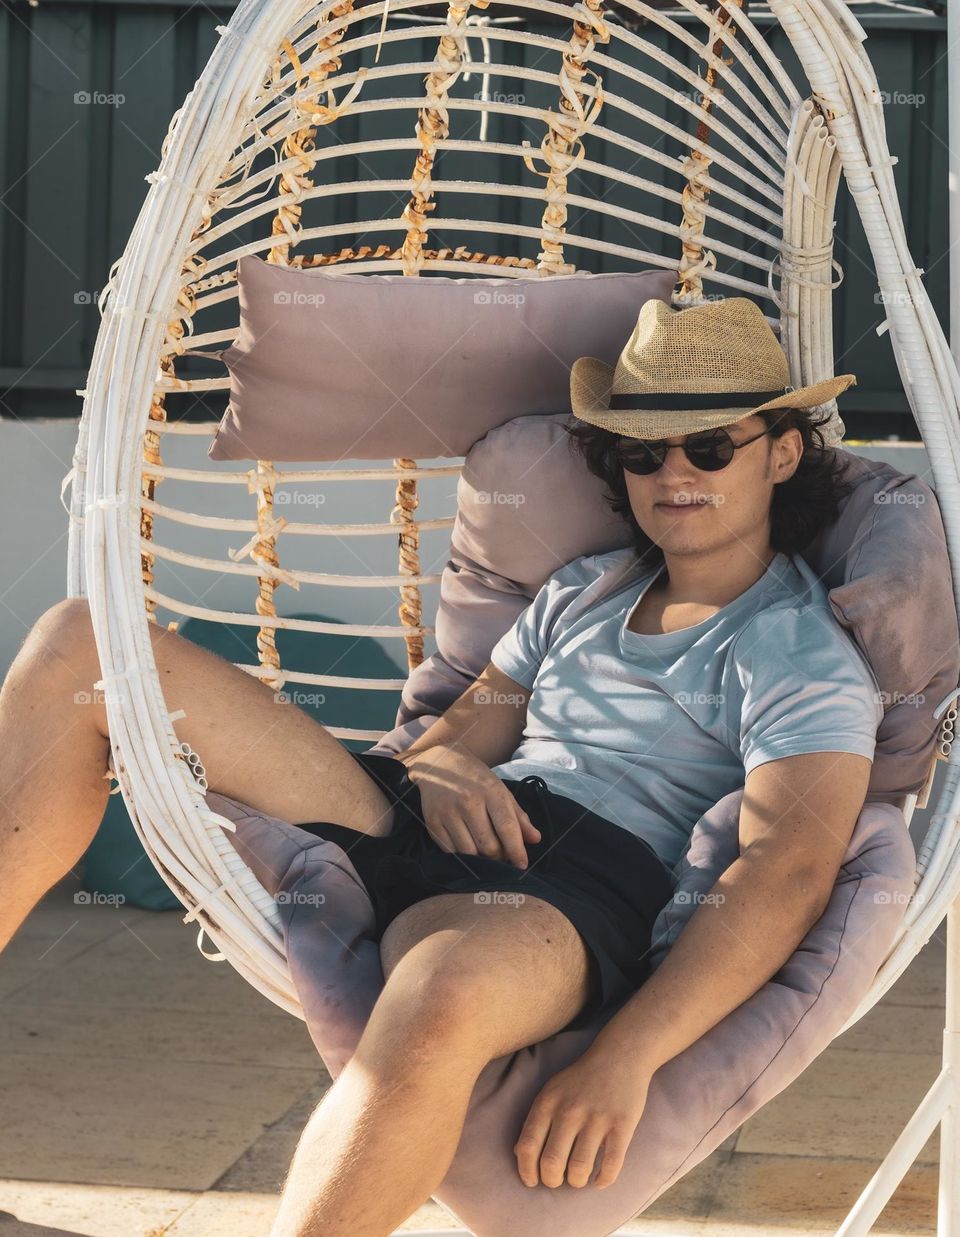 A young man wearing a sun hat & shades sits chilling in a swing chair in the early evening sun